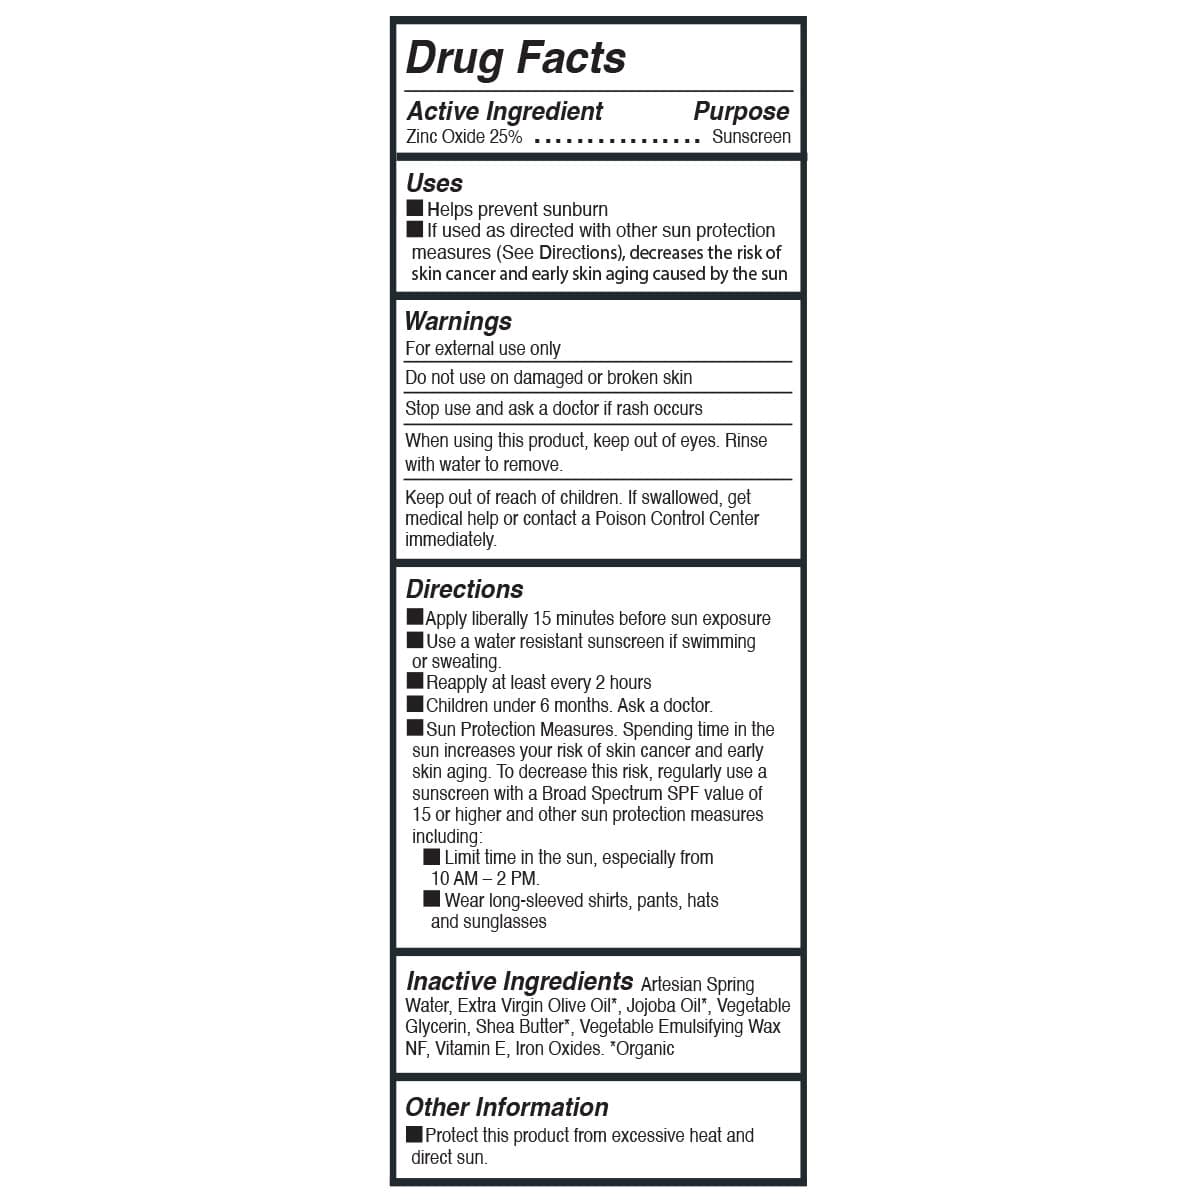 Drug Facts: Active Ingredient Zinc Oxide 25% Purpose Sunscreen Uses: Helps prevent sunburn If used as directed with other sun protection measures (See Directions), decreases the risk of skin cancer and early skin aging caused by the sun Warnings: For external use only. See 'Drug Facts' on product page for full list.